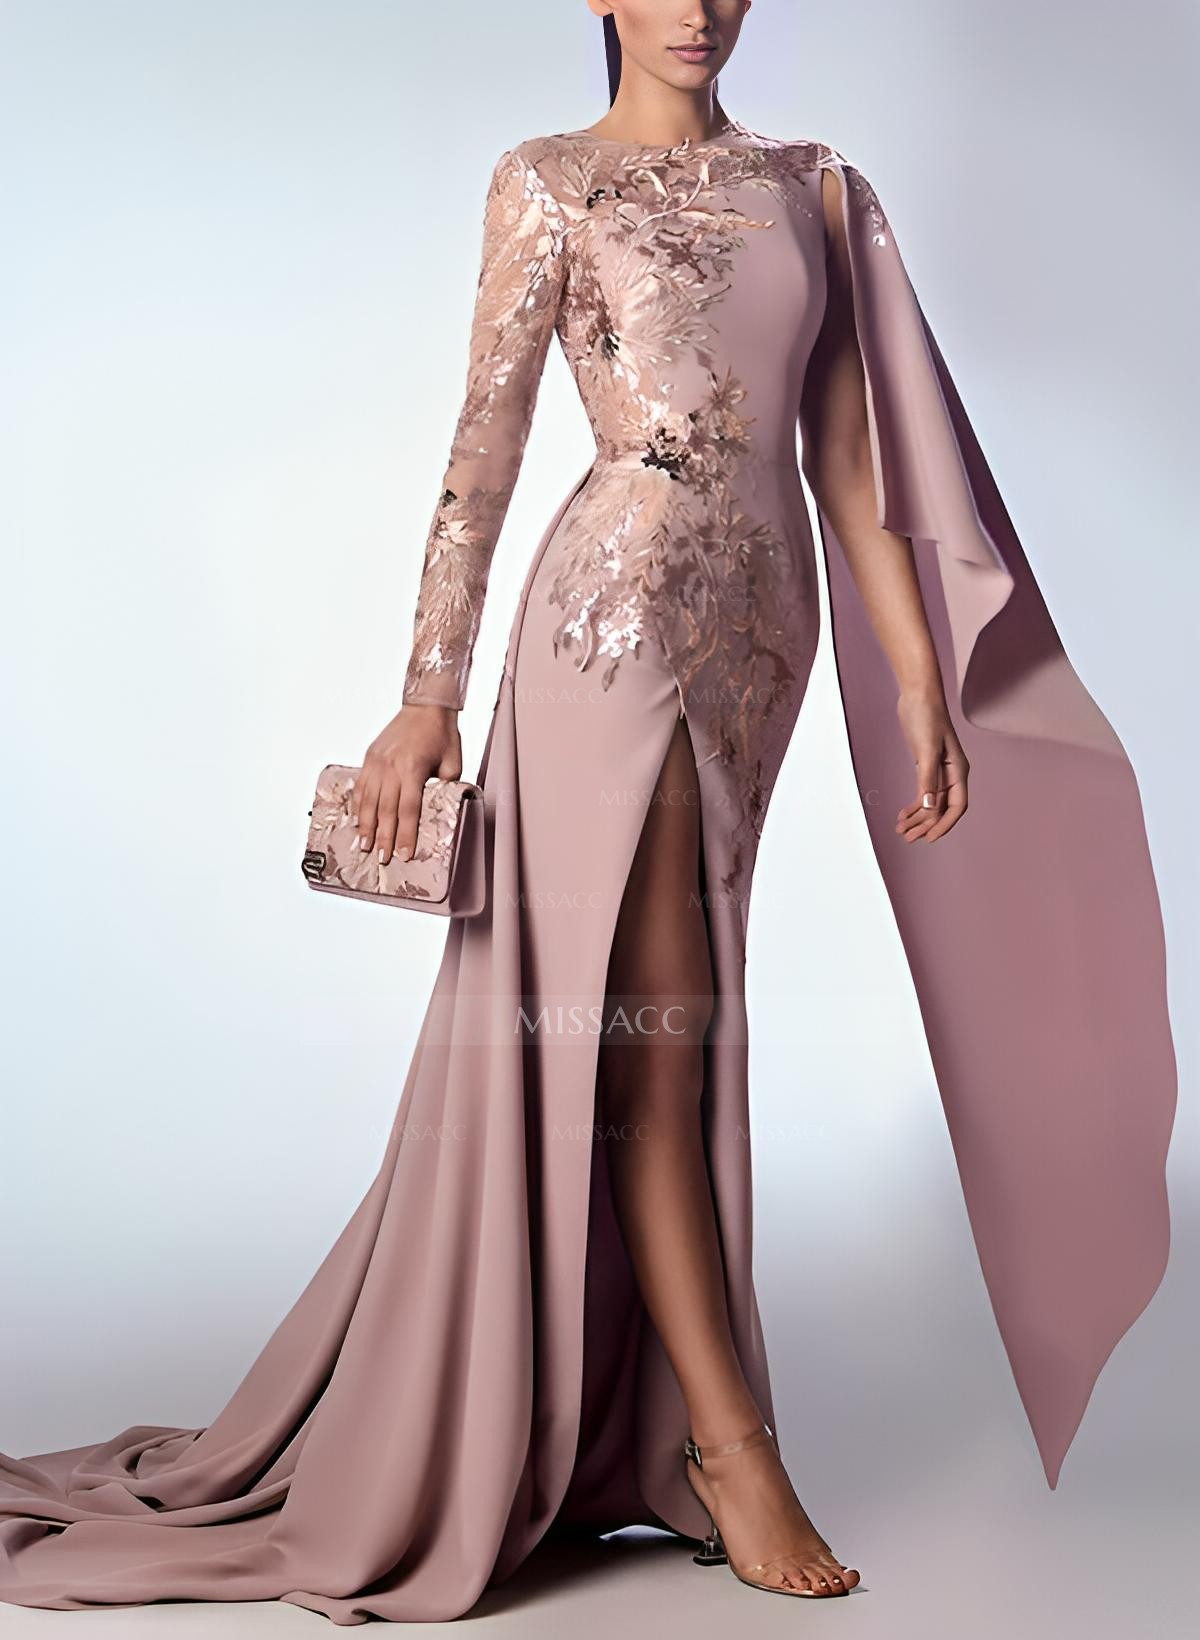 Scoop Neck Long Sleeves Court Train Evening Dresses With Appliques Lace